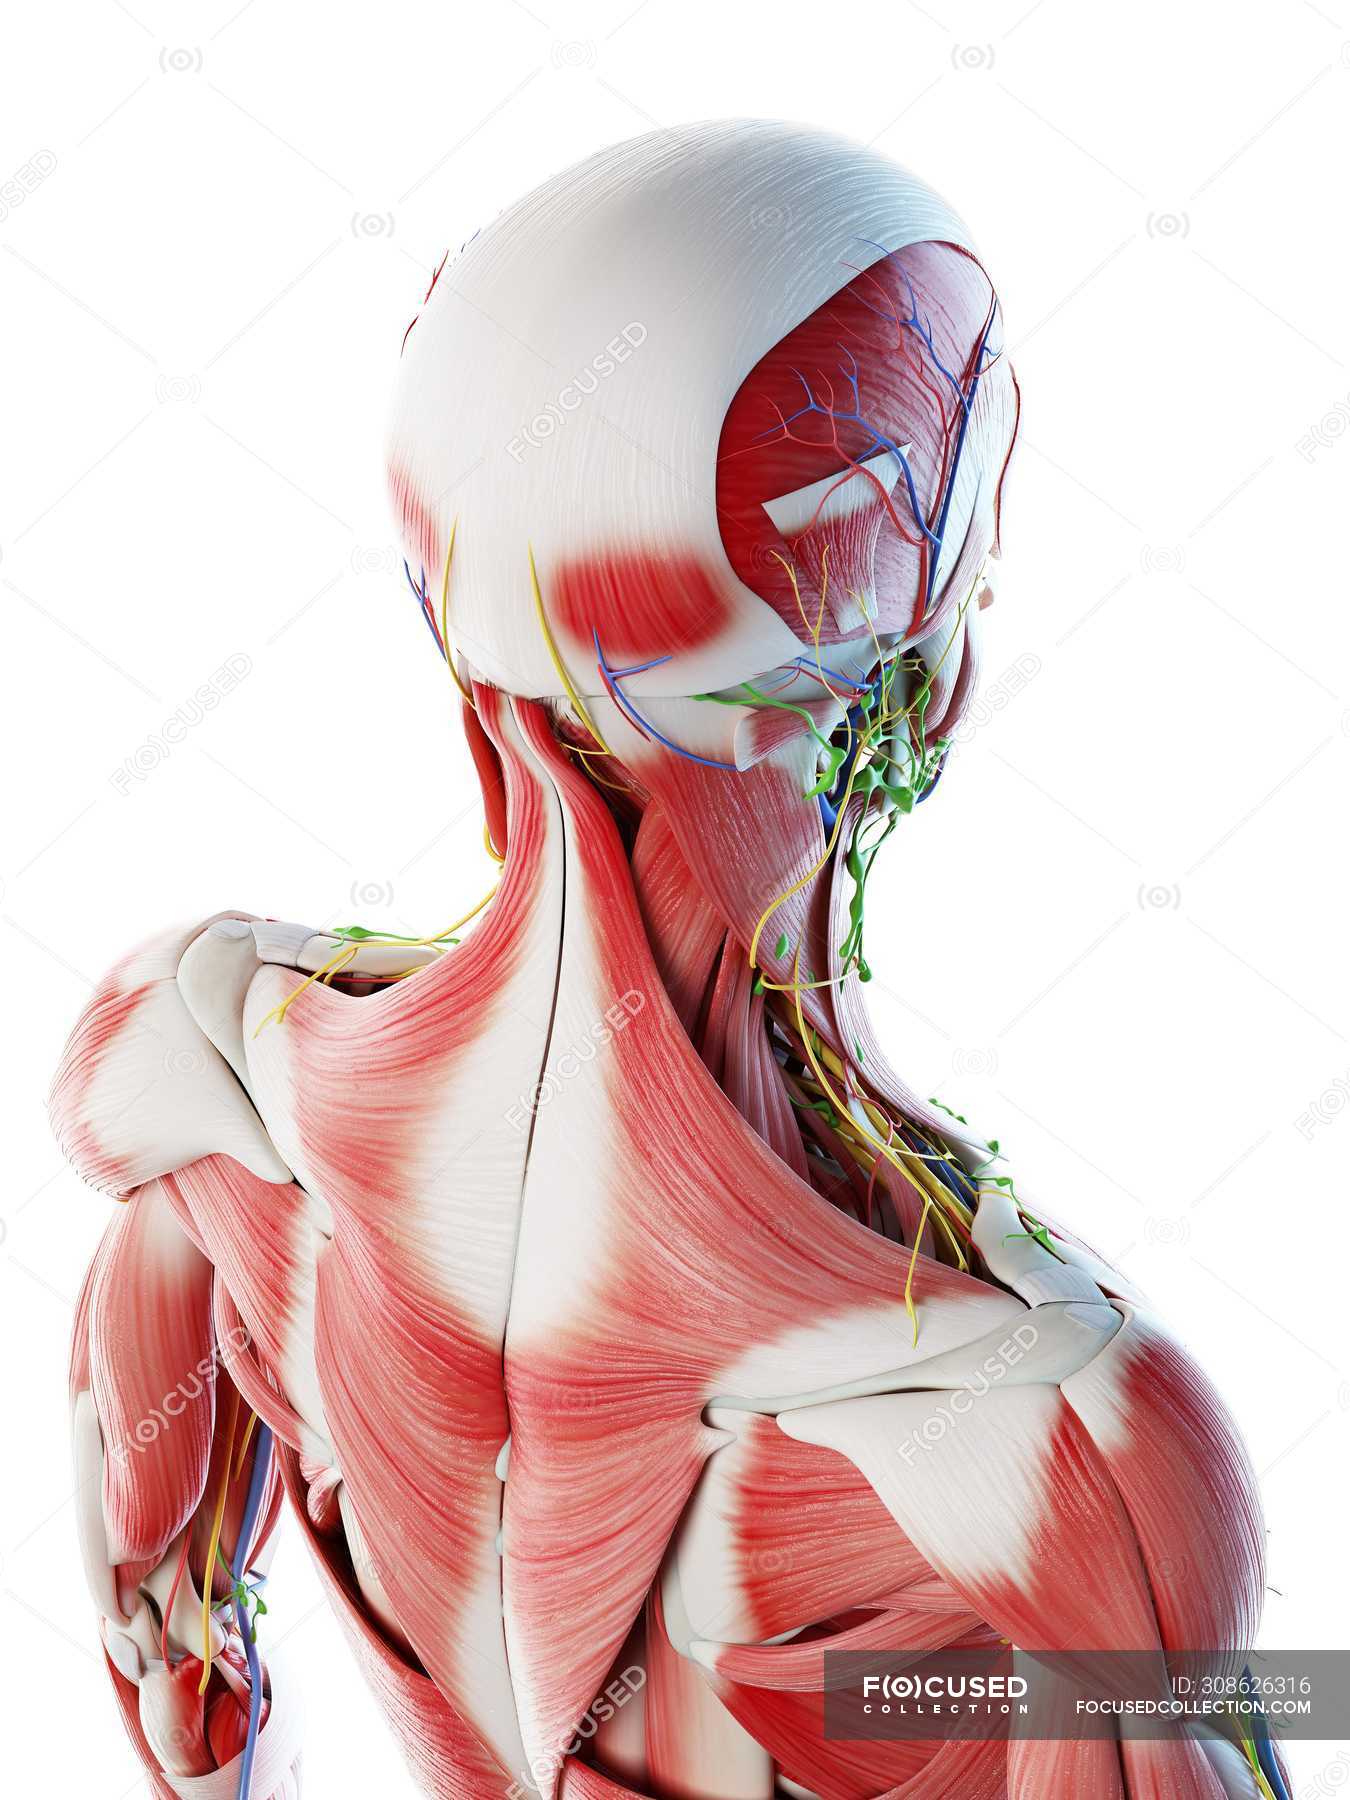 Male Back Neck And Head Muscles Computer Illustration Anatomical 3d Model Stock Photo